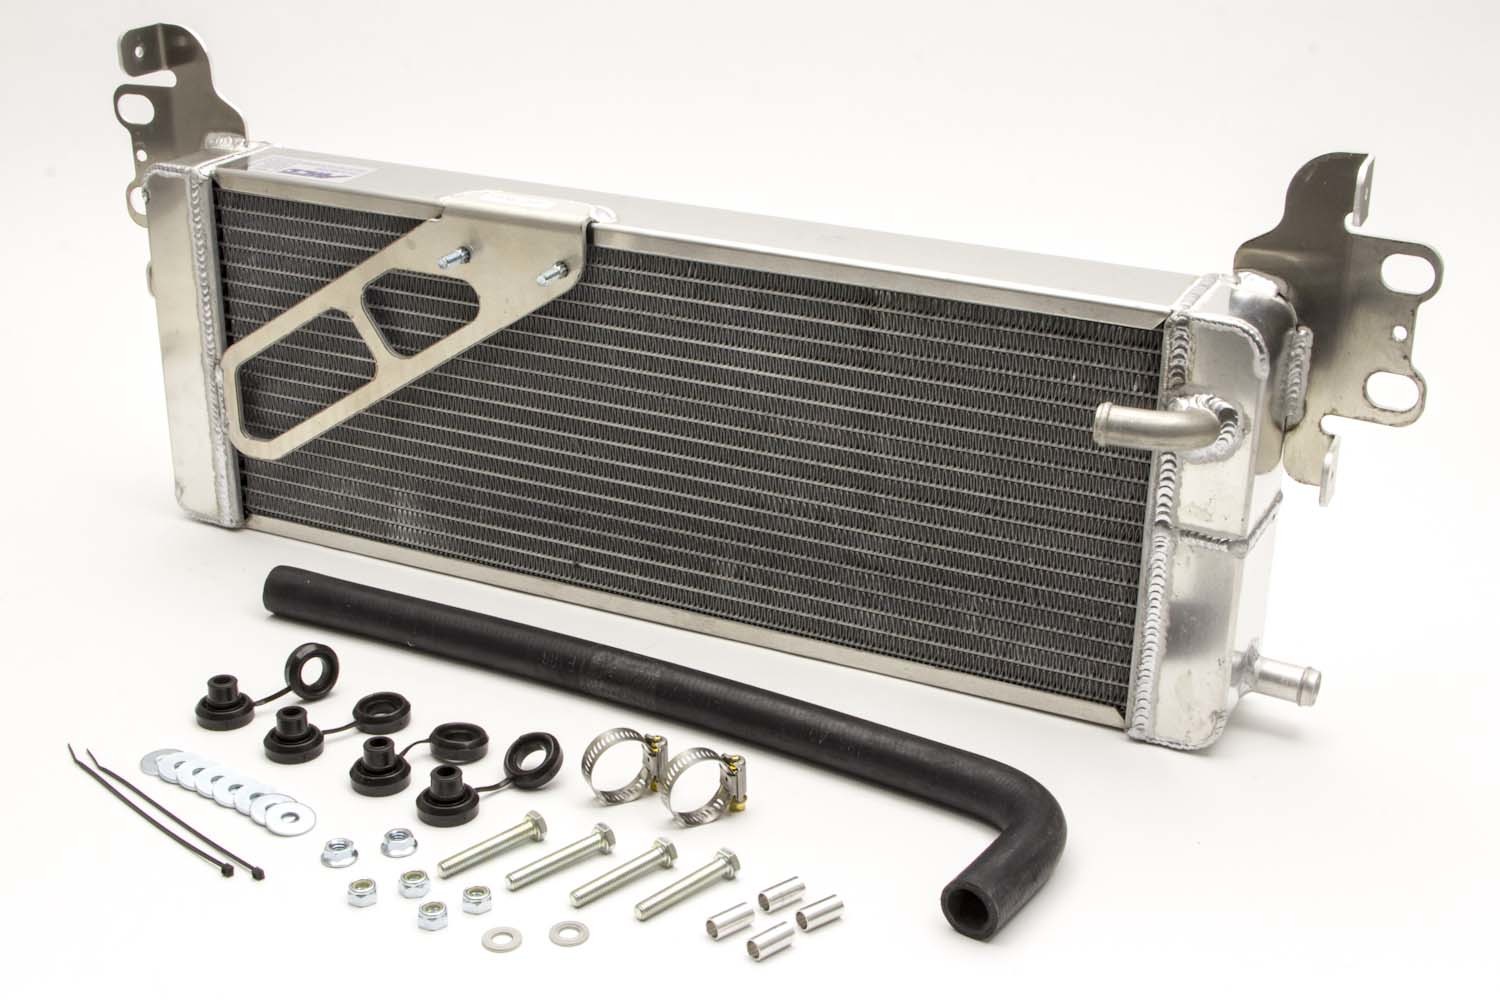 Afco Racing Heat Exchanger, Dual Passenger, Aluminum, Natural, Shelby GT500, Ford Mustang 2007-13, Each